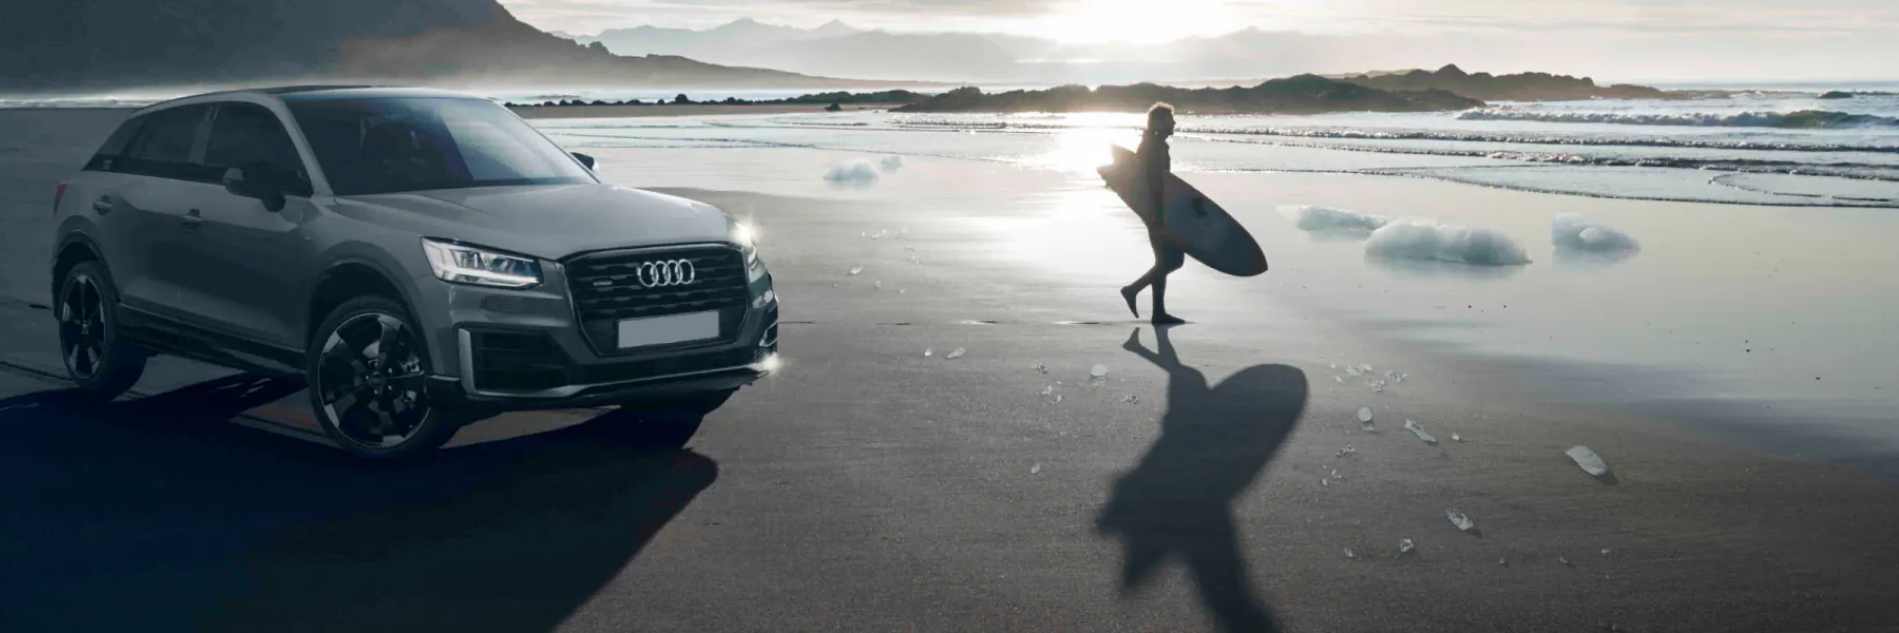 audi on beach with man walking into sea with surfboard